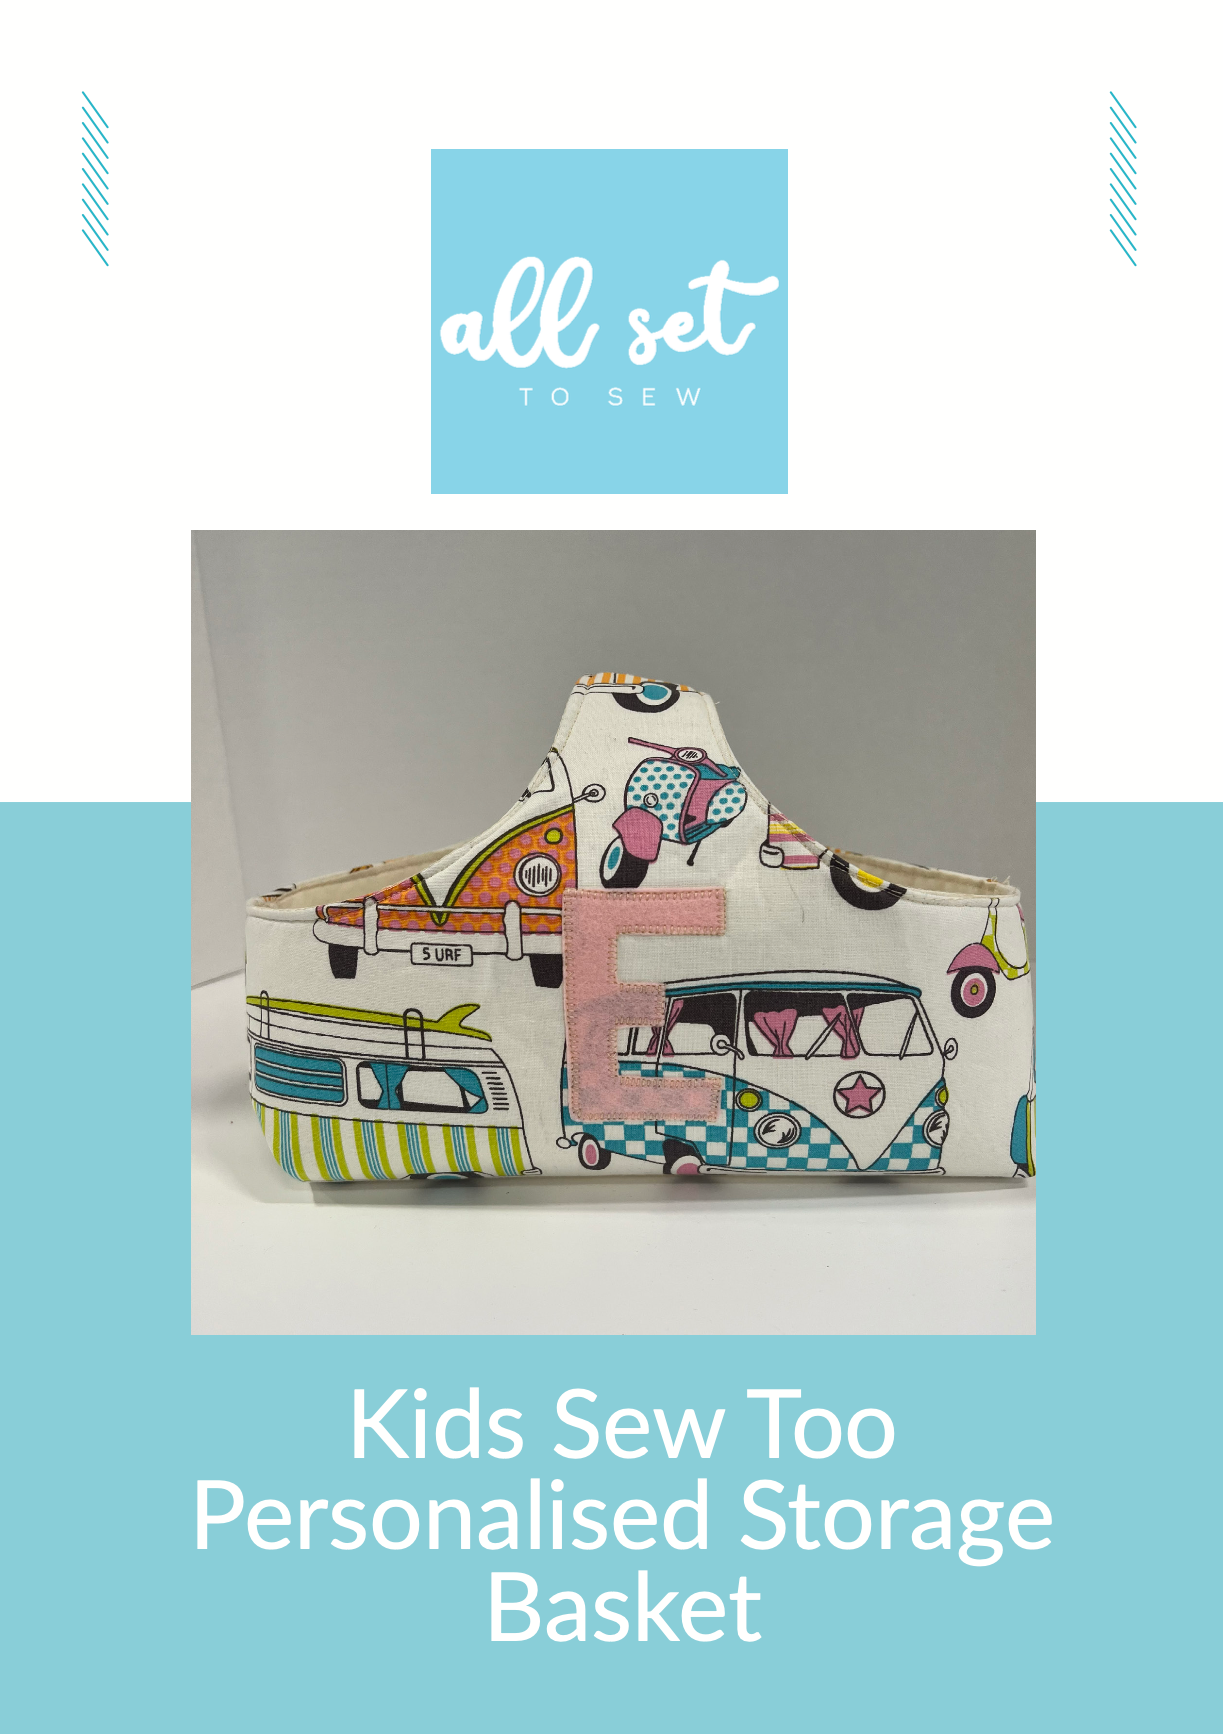 All Set to Sew - 'Kids Sew Too' Personalised Storage Basket - Printed Pattern - allsettosew